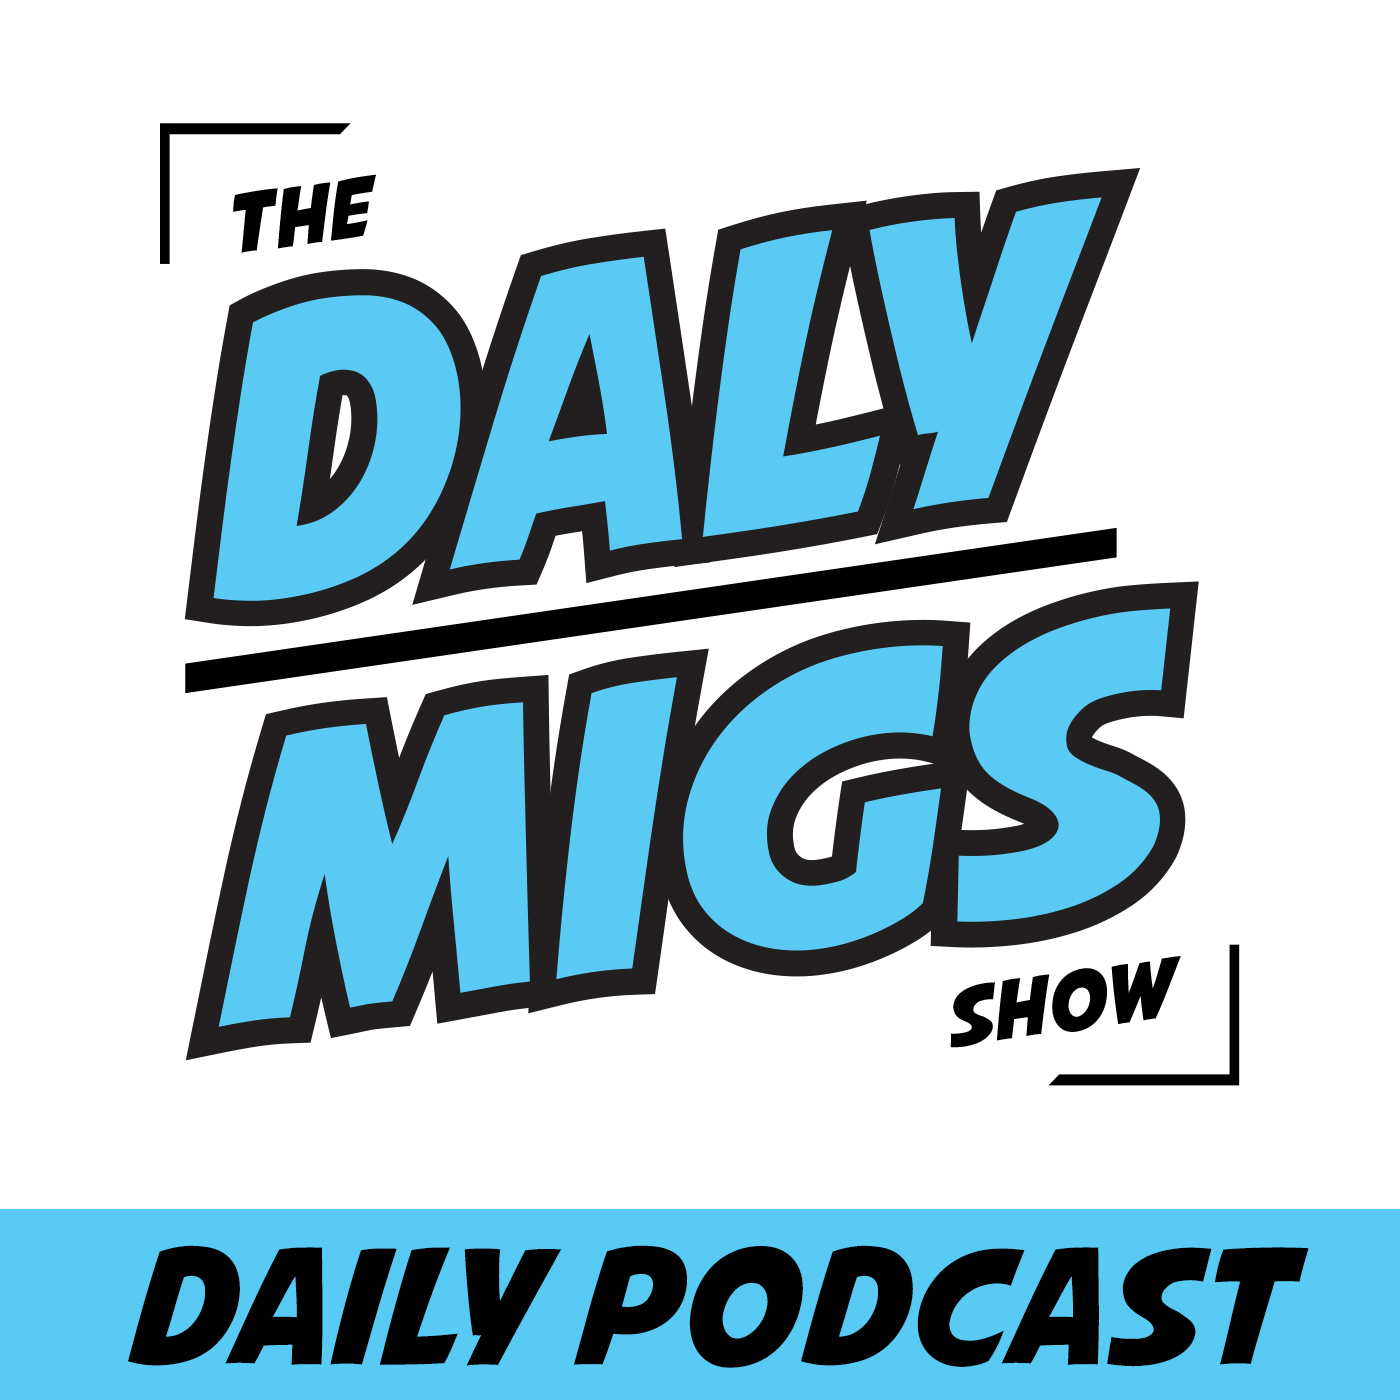 Daily Podcast pt. 3 - "Straight to the comments!"